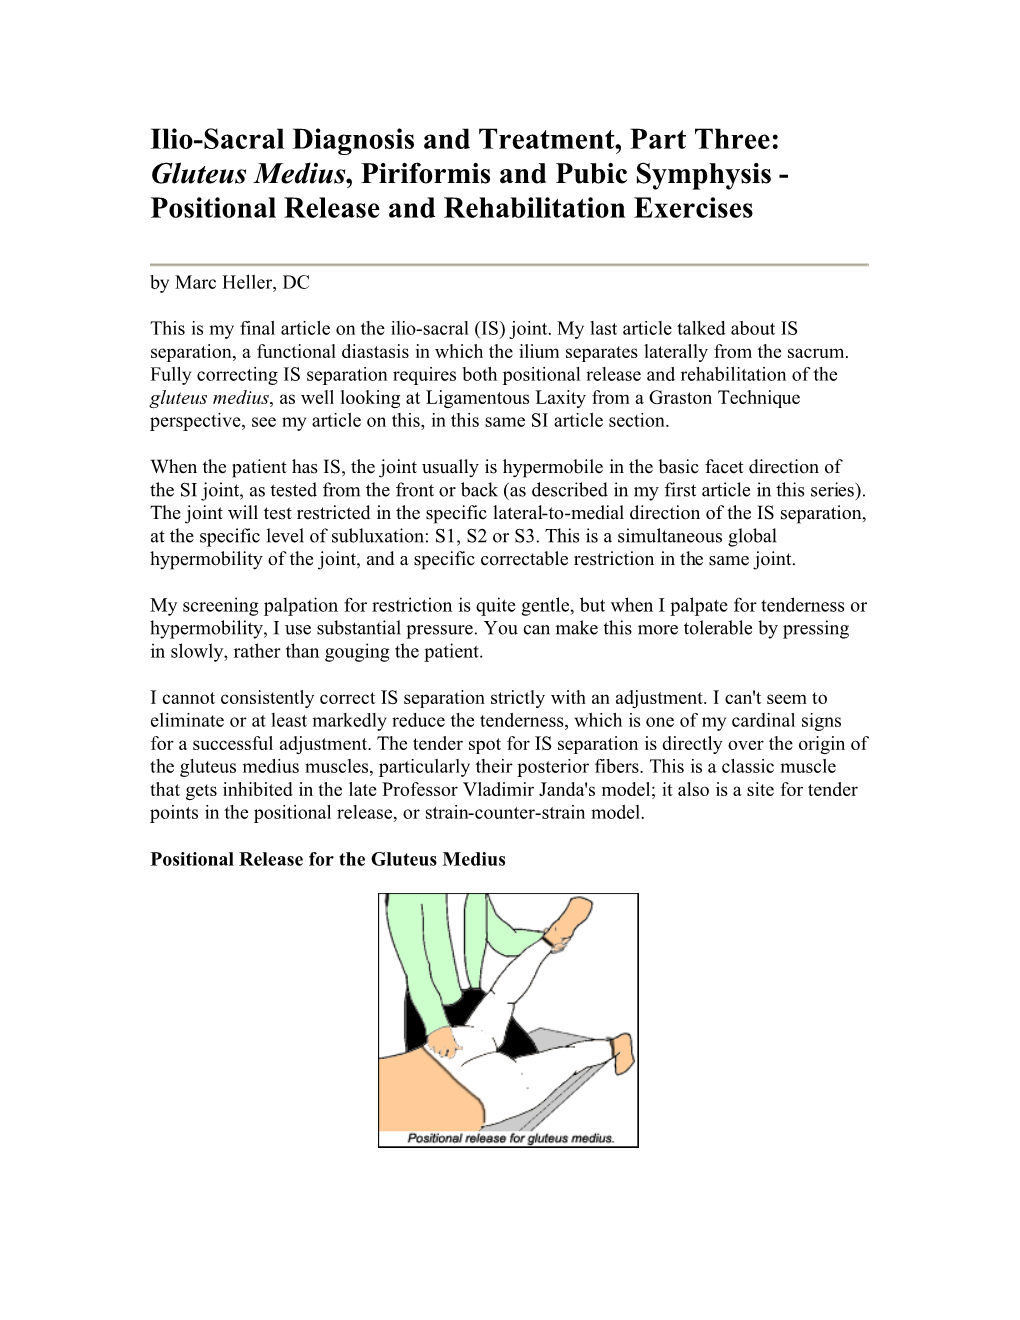 Gluteus Medius, Piriformis and Pubic Symphysis - Positional Release and Rehabilitation Exercises by Marc Heller, DC